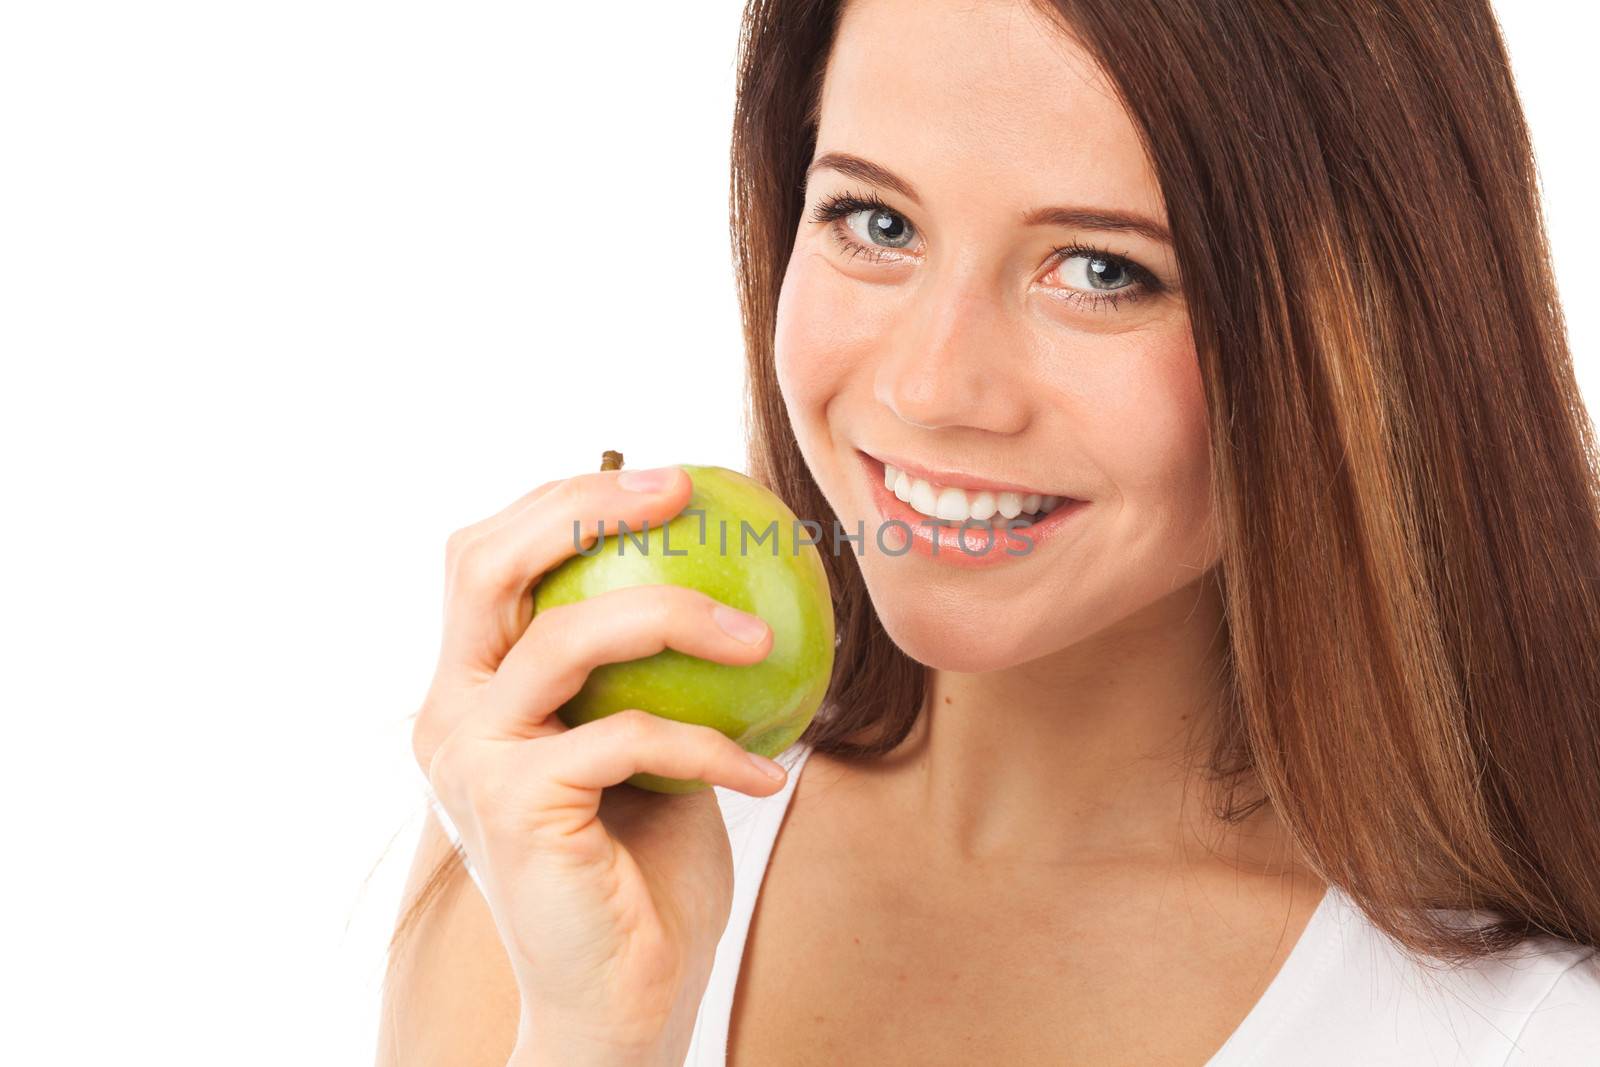 Pretty young woman eating a green apple, isolated on white